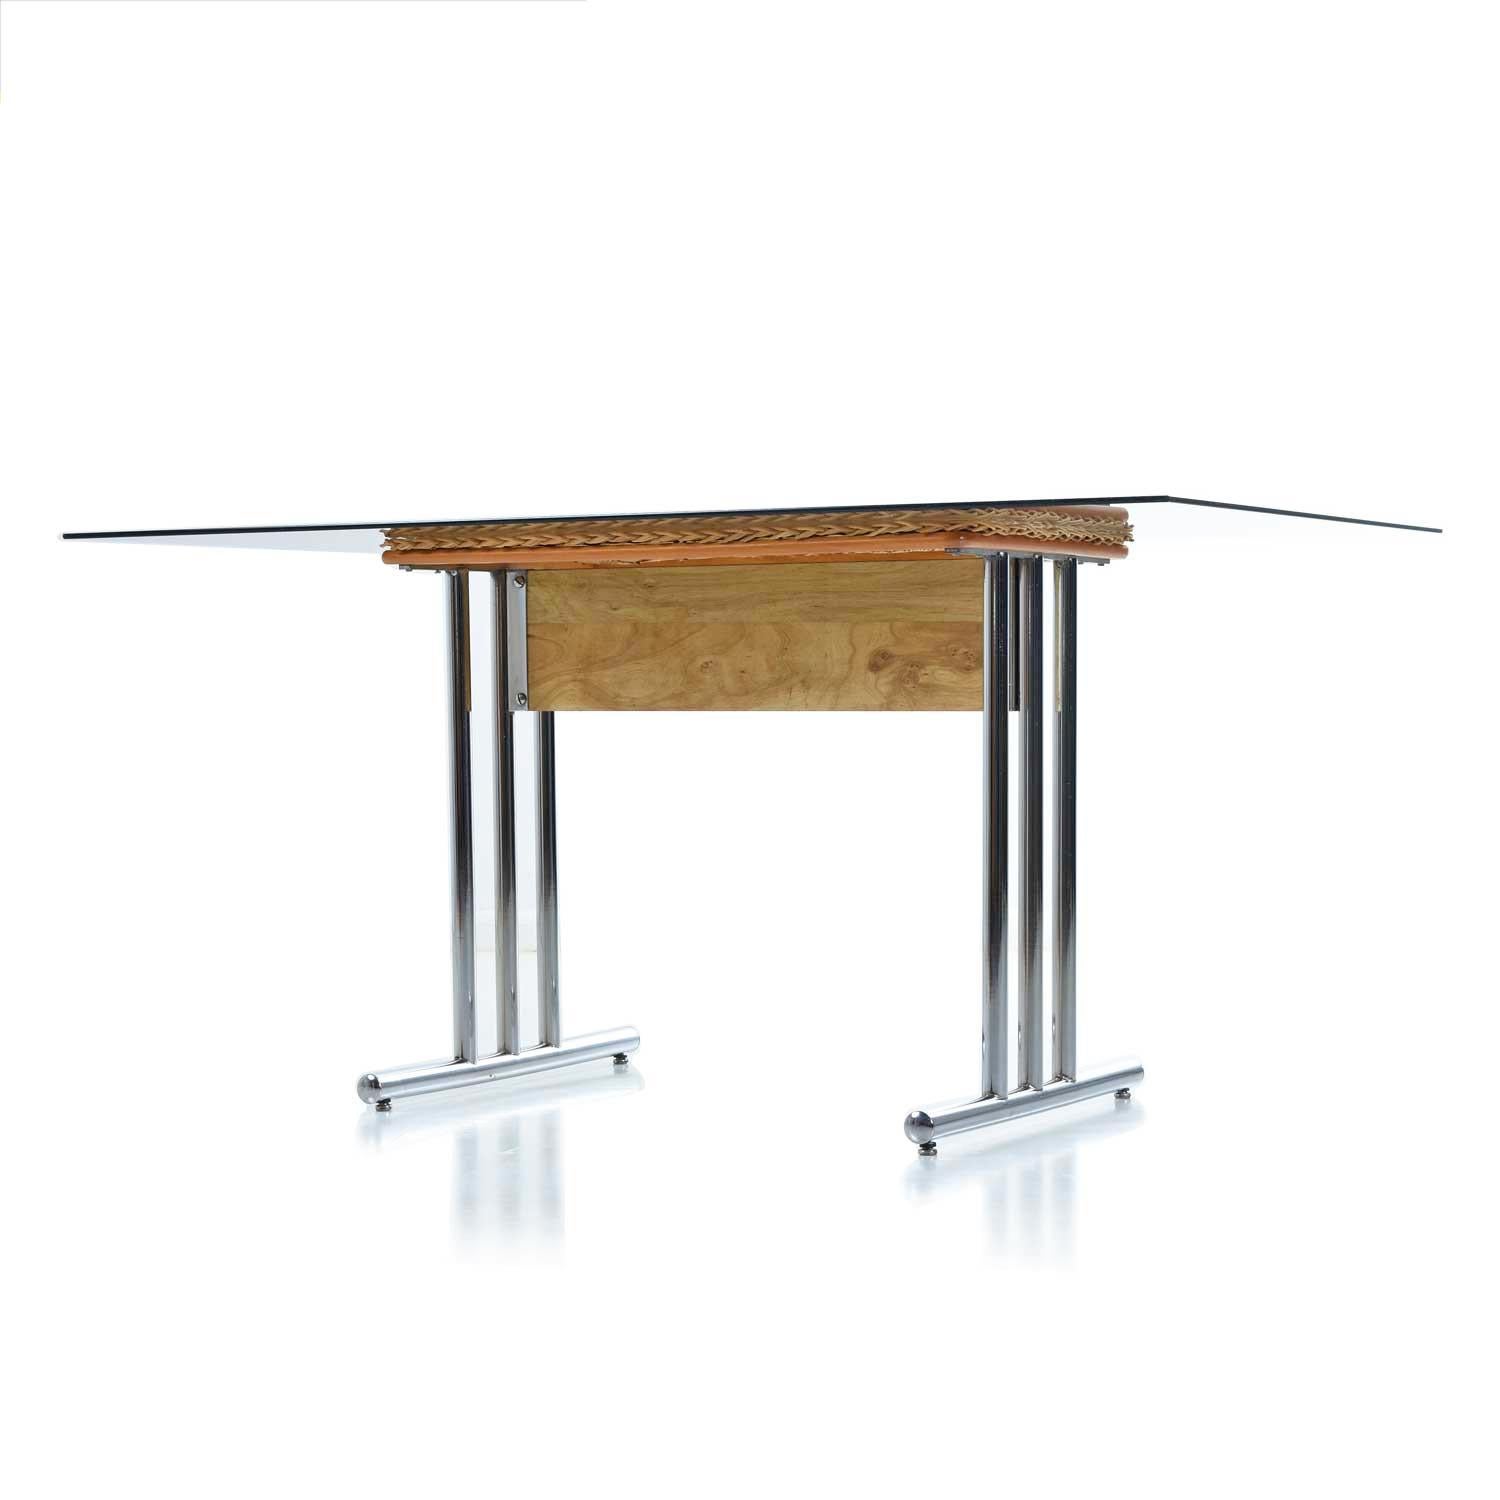 Chrome, wicker, and smoked glass… it doesn’t get much more 1970s than this! The 1970s were all about flare and personality and this table captures it all, smartly. The hand polished tubular chrome steel absolutely sparkles. The modern metal material